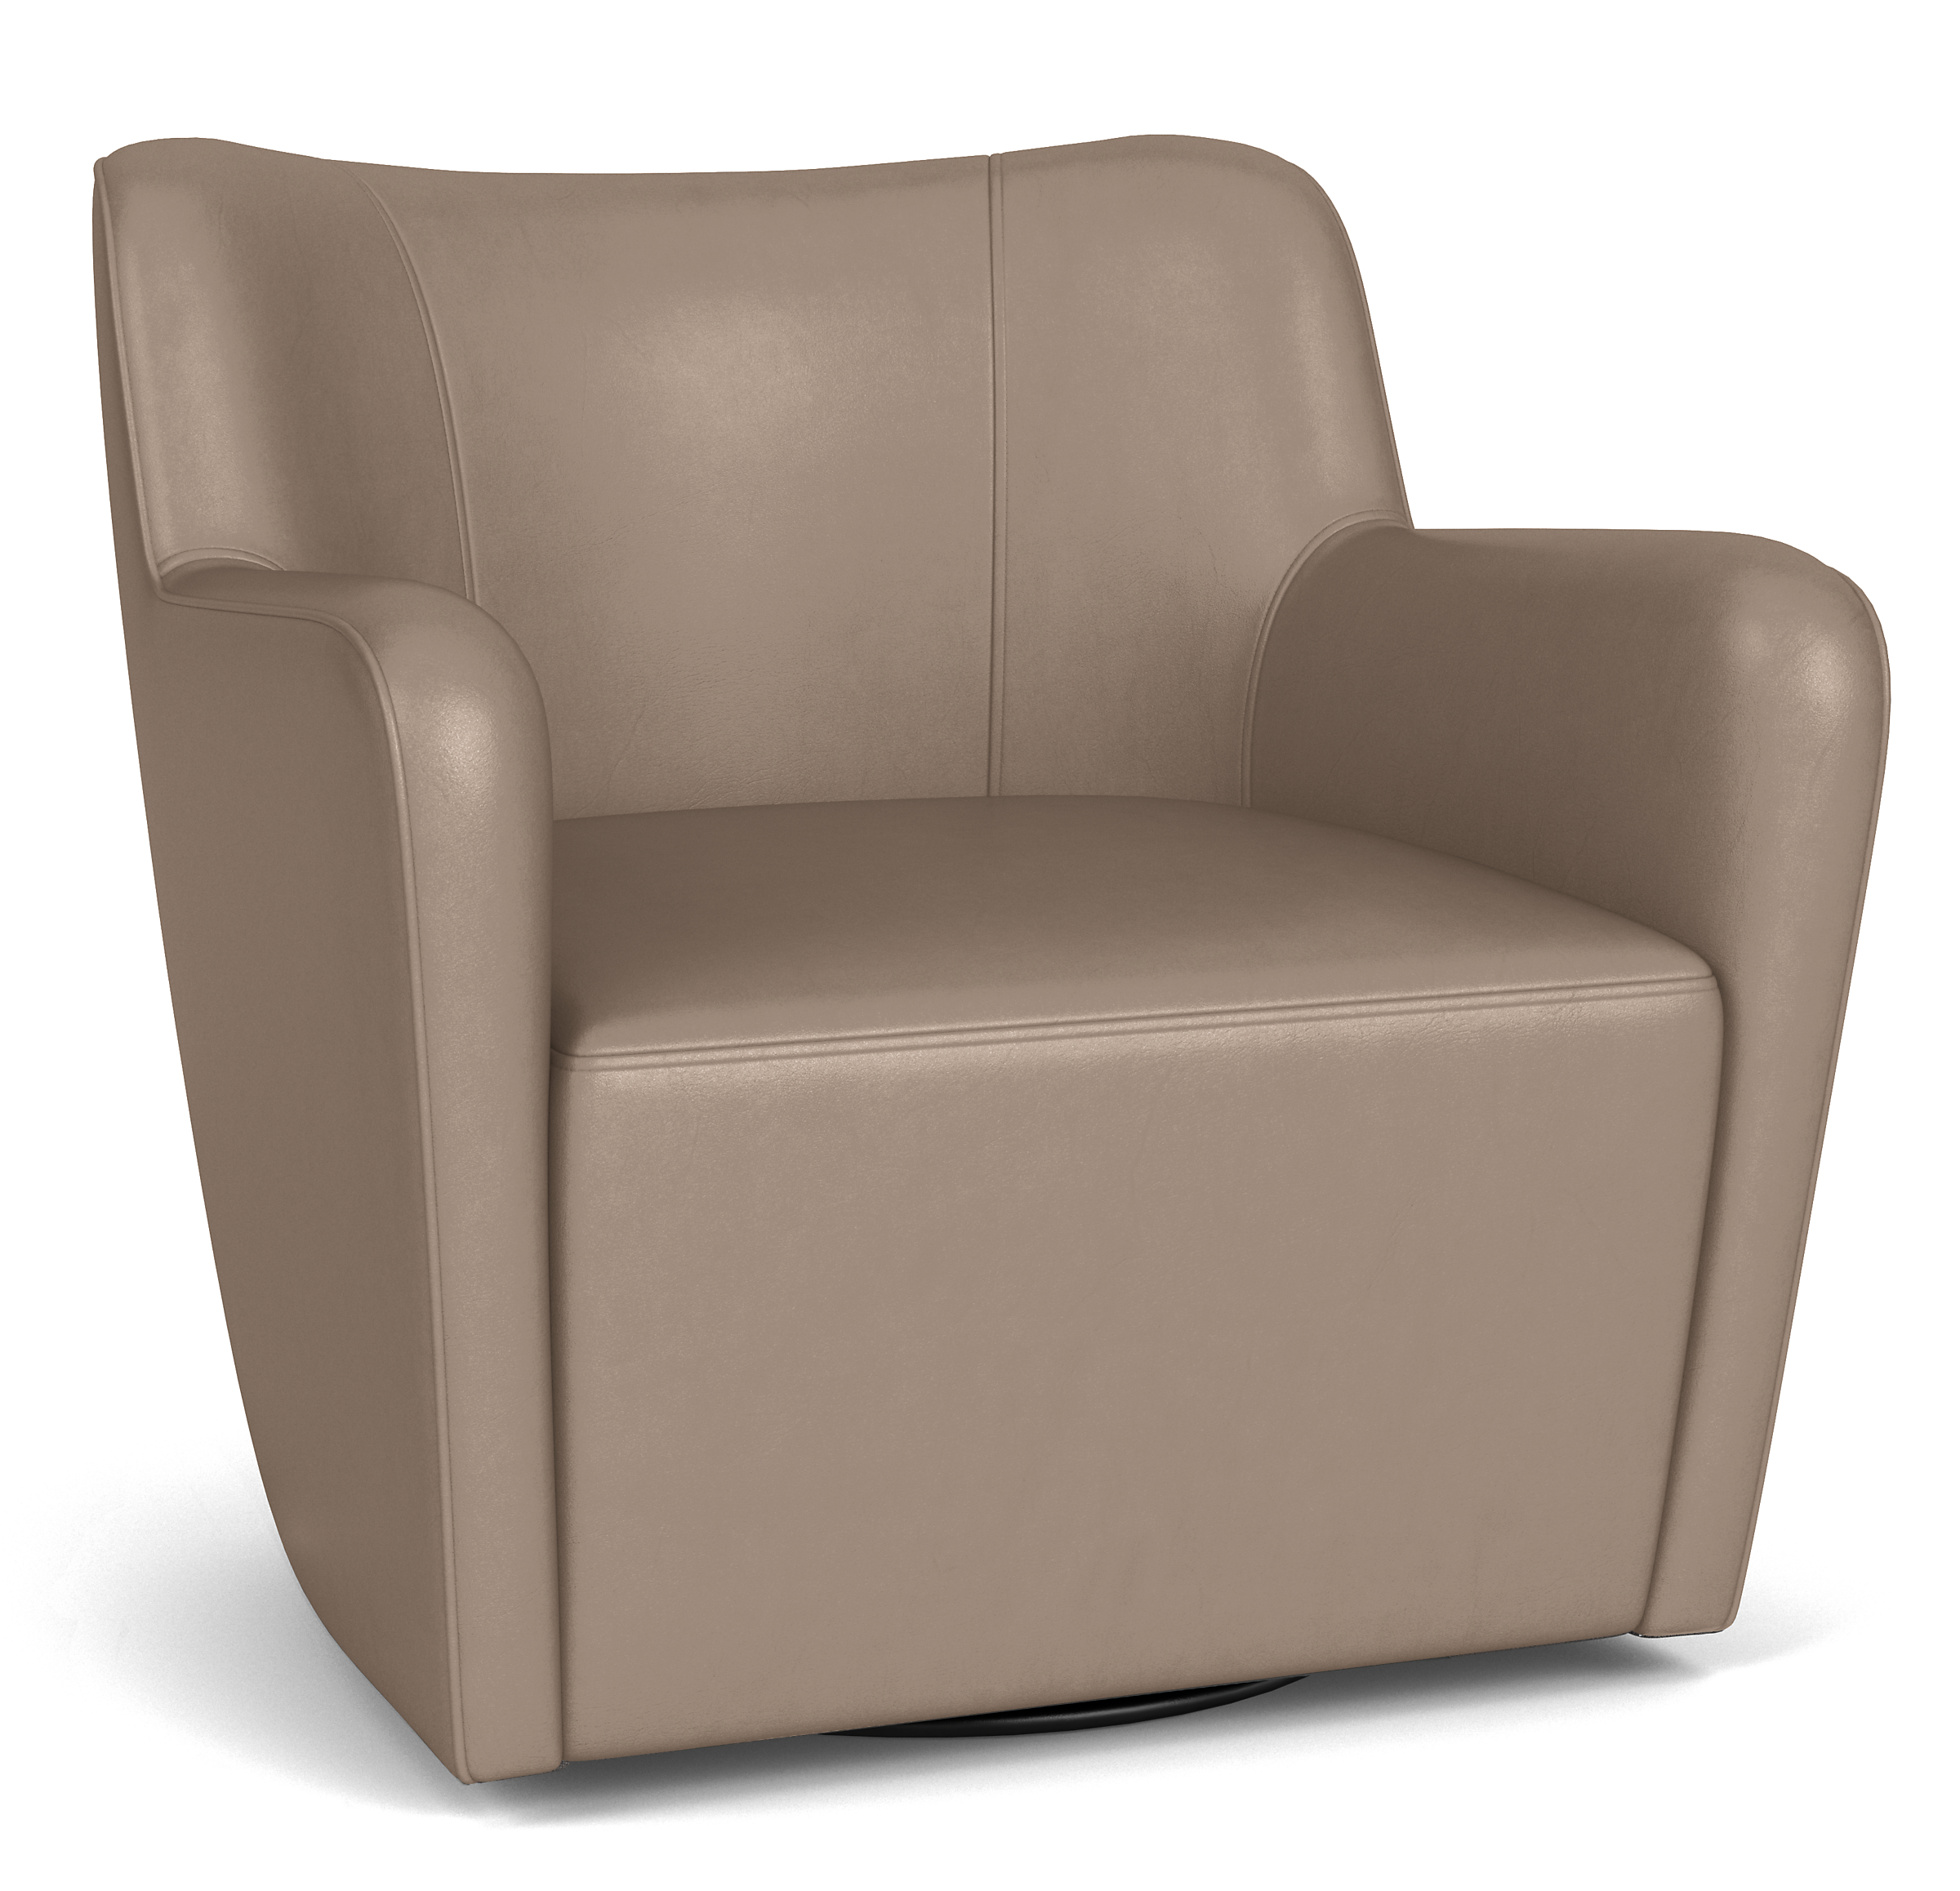 Lily Swivel Chair in Urbino Stone Leather